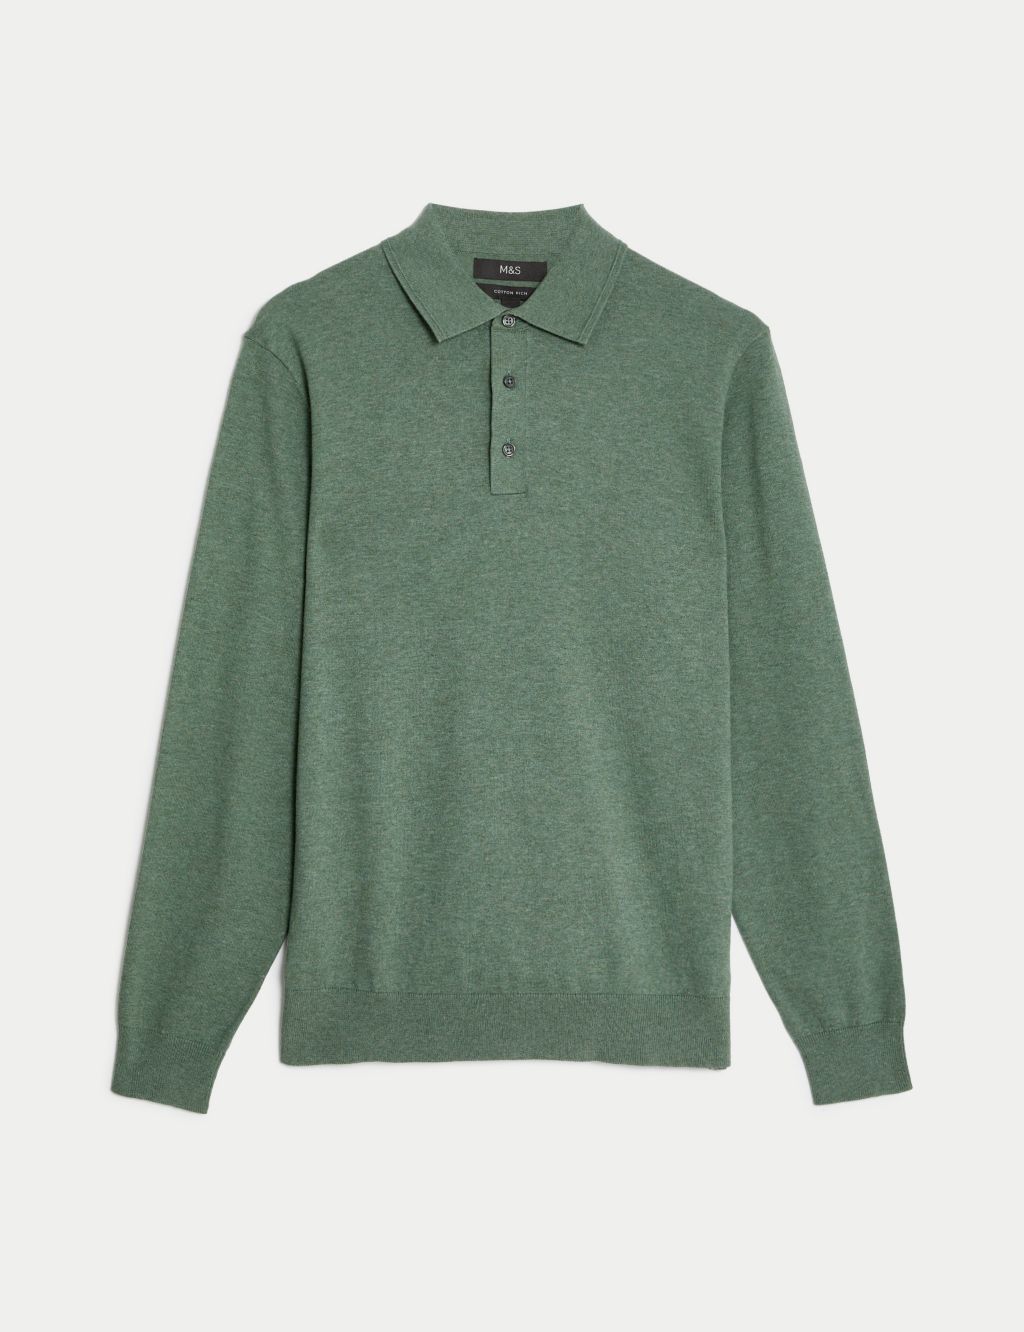 Cotton Rich Tipped Knitted Polo Shirt image 2